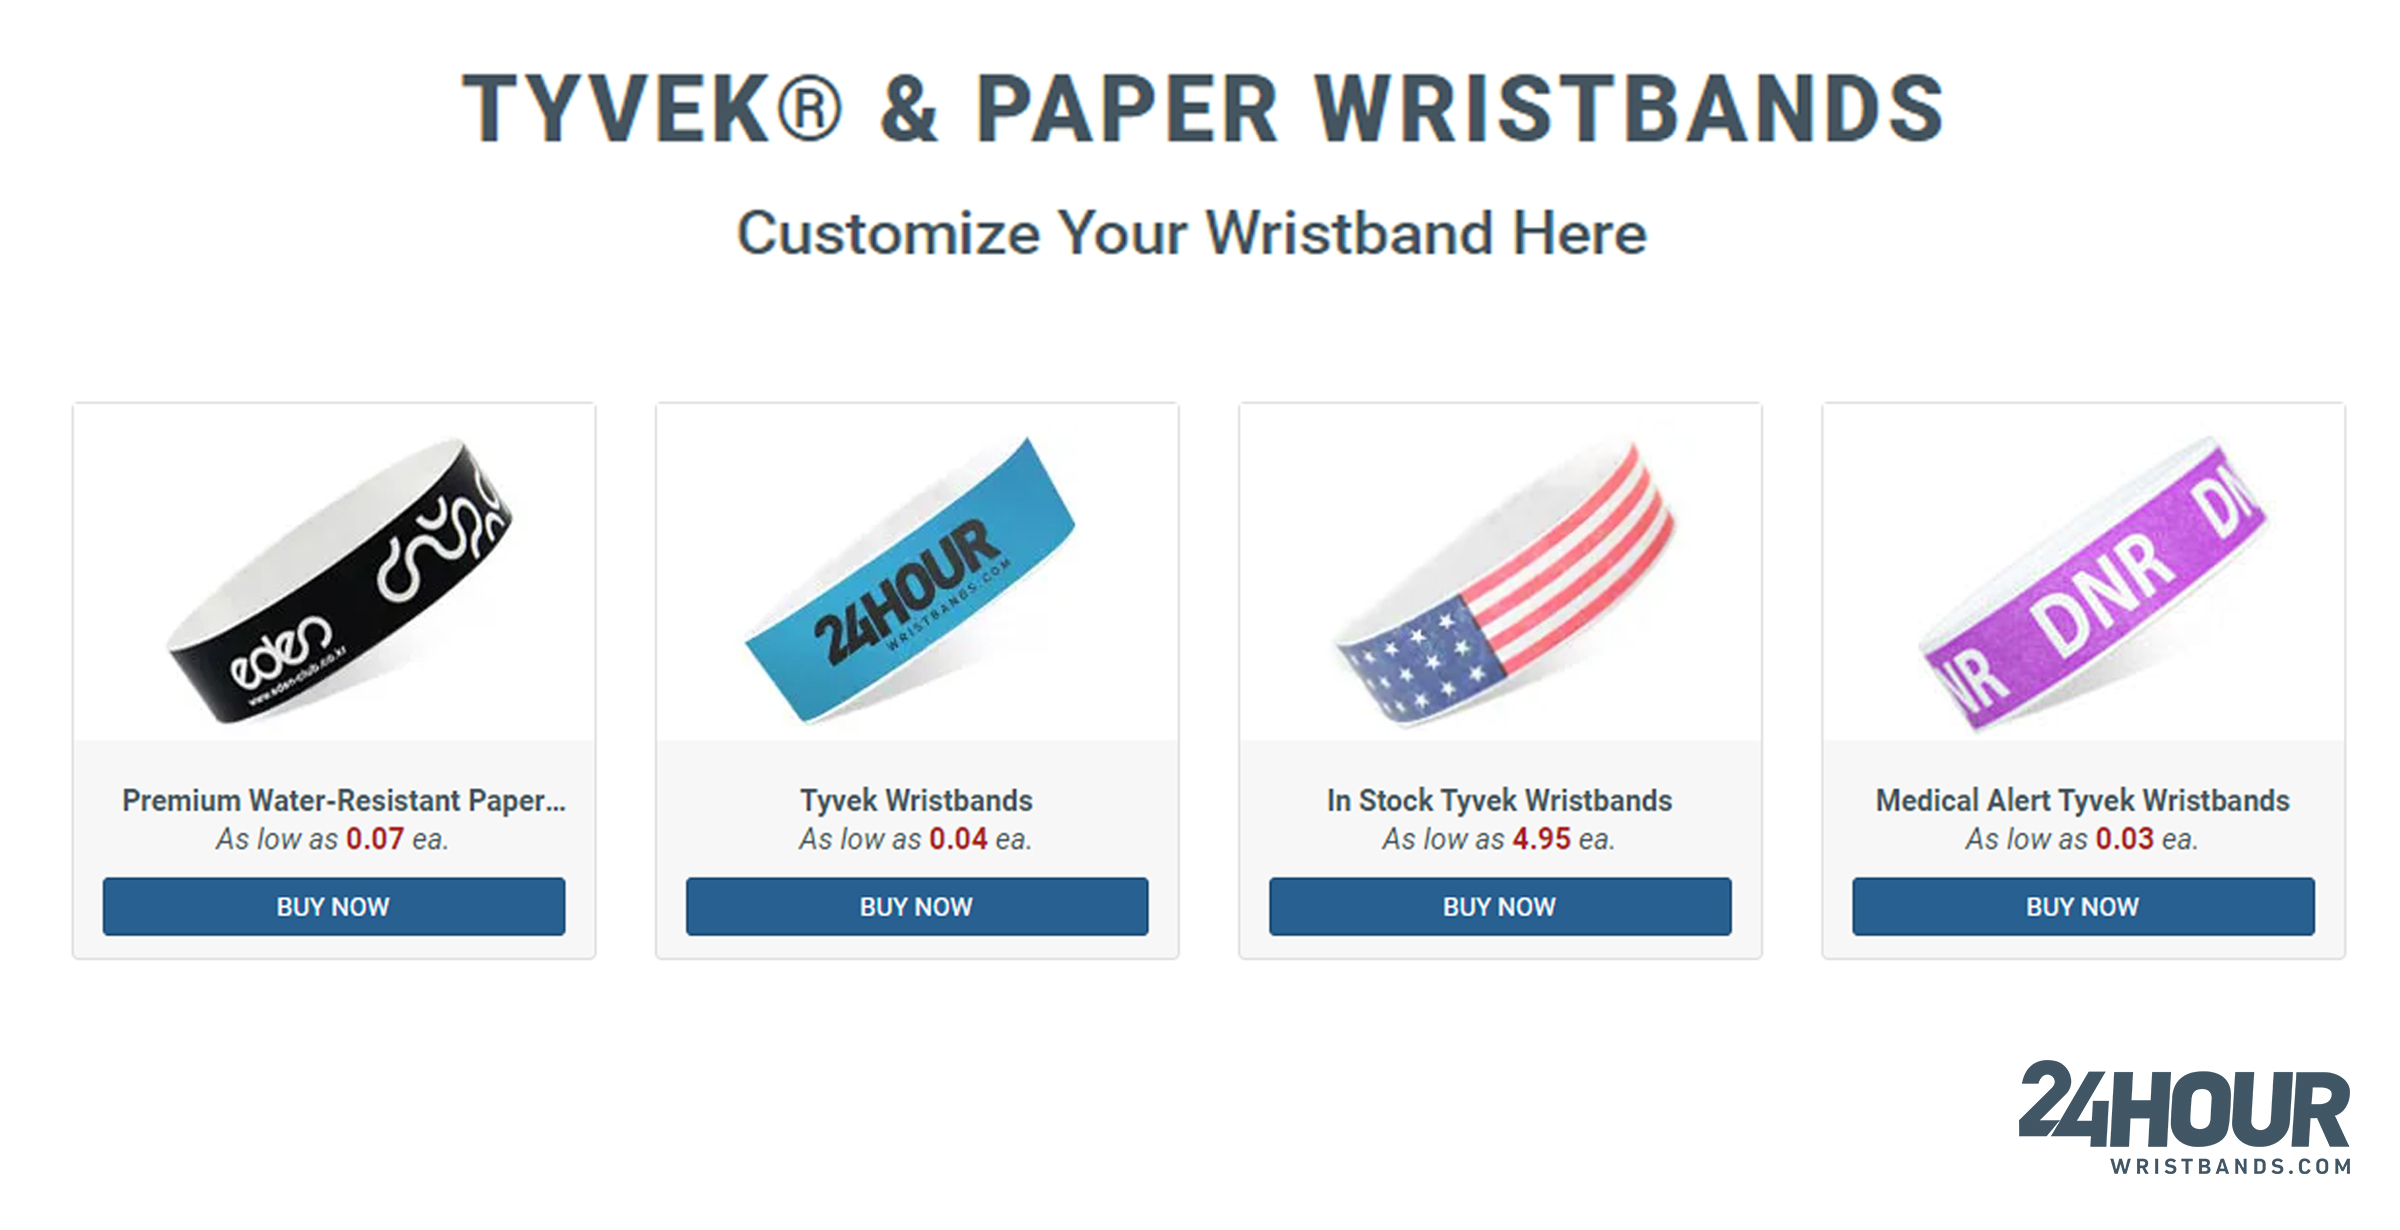 Tyvek and Paper Wristbands